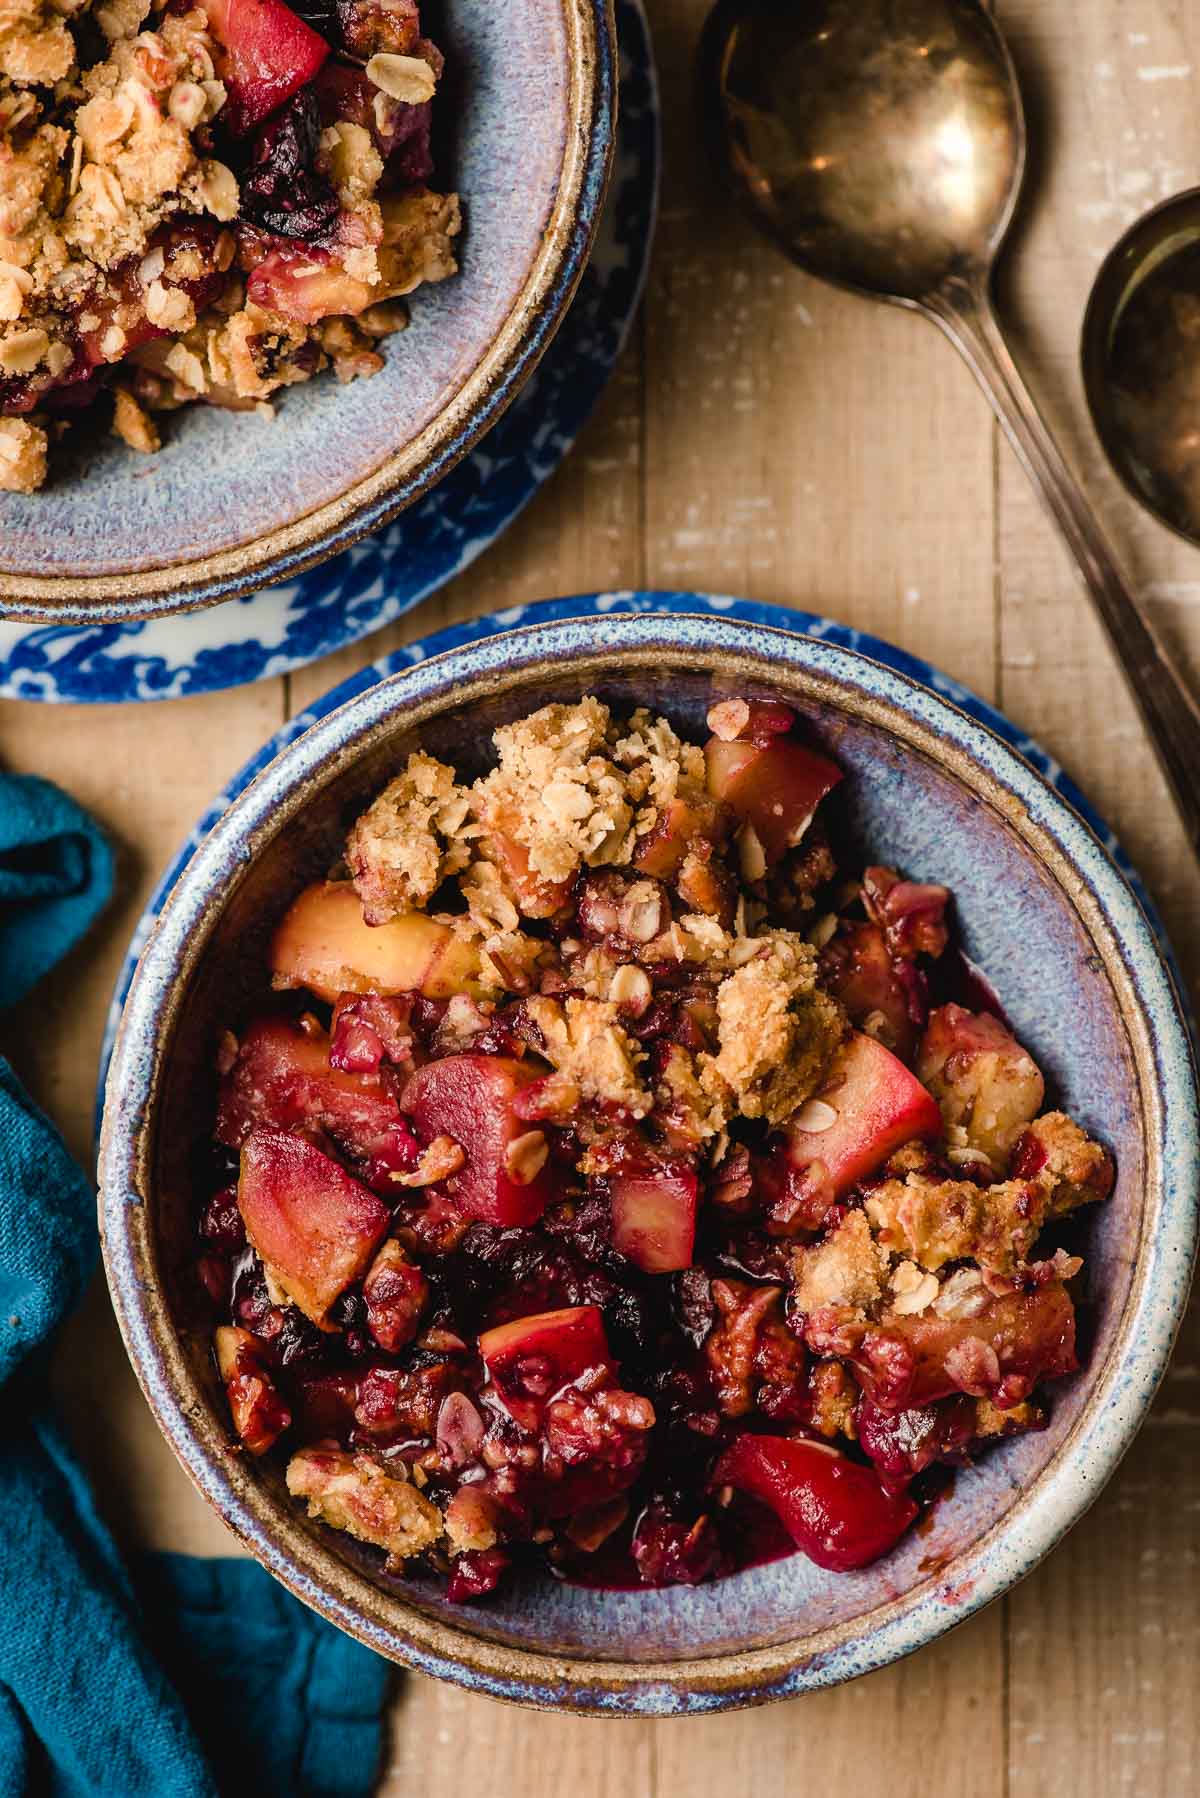 Apple and blueberry crumble in a undecorous soil bowl.